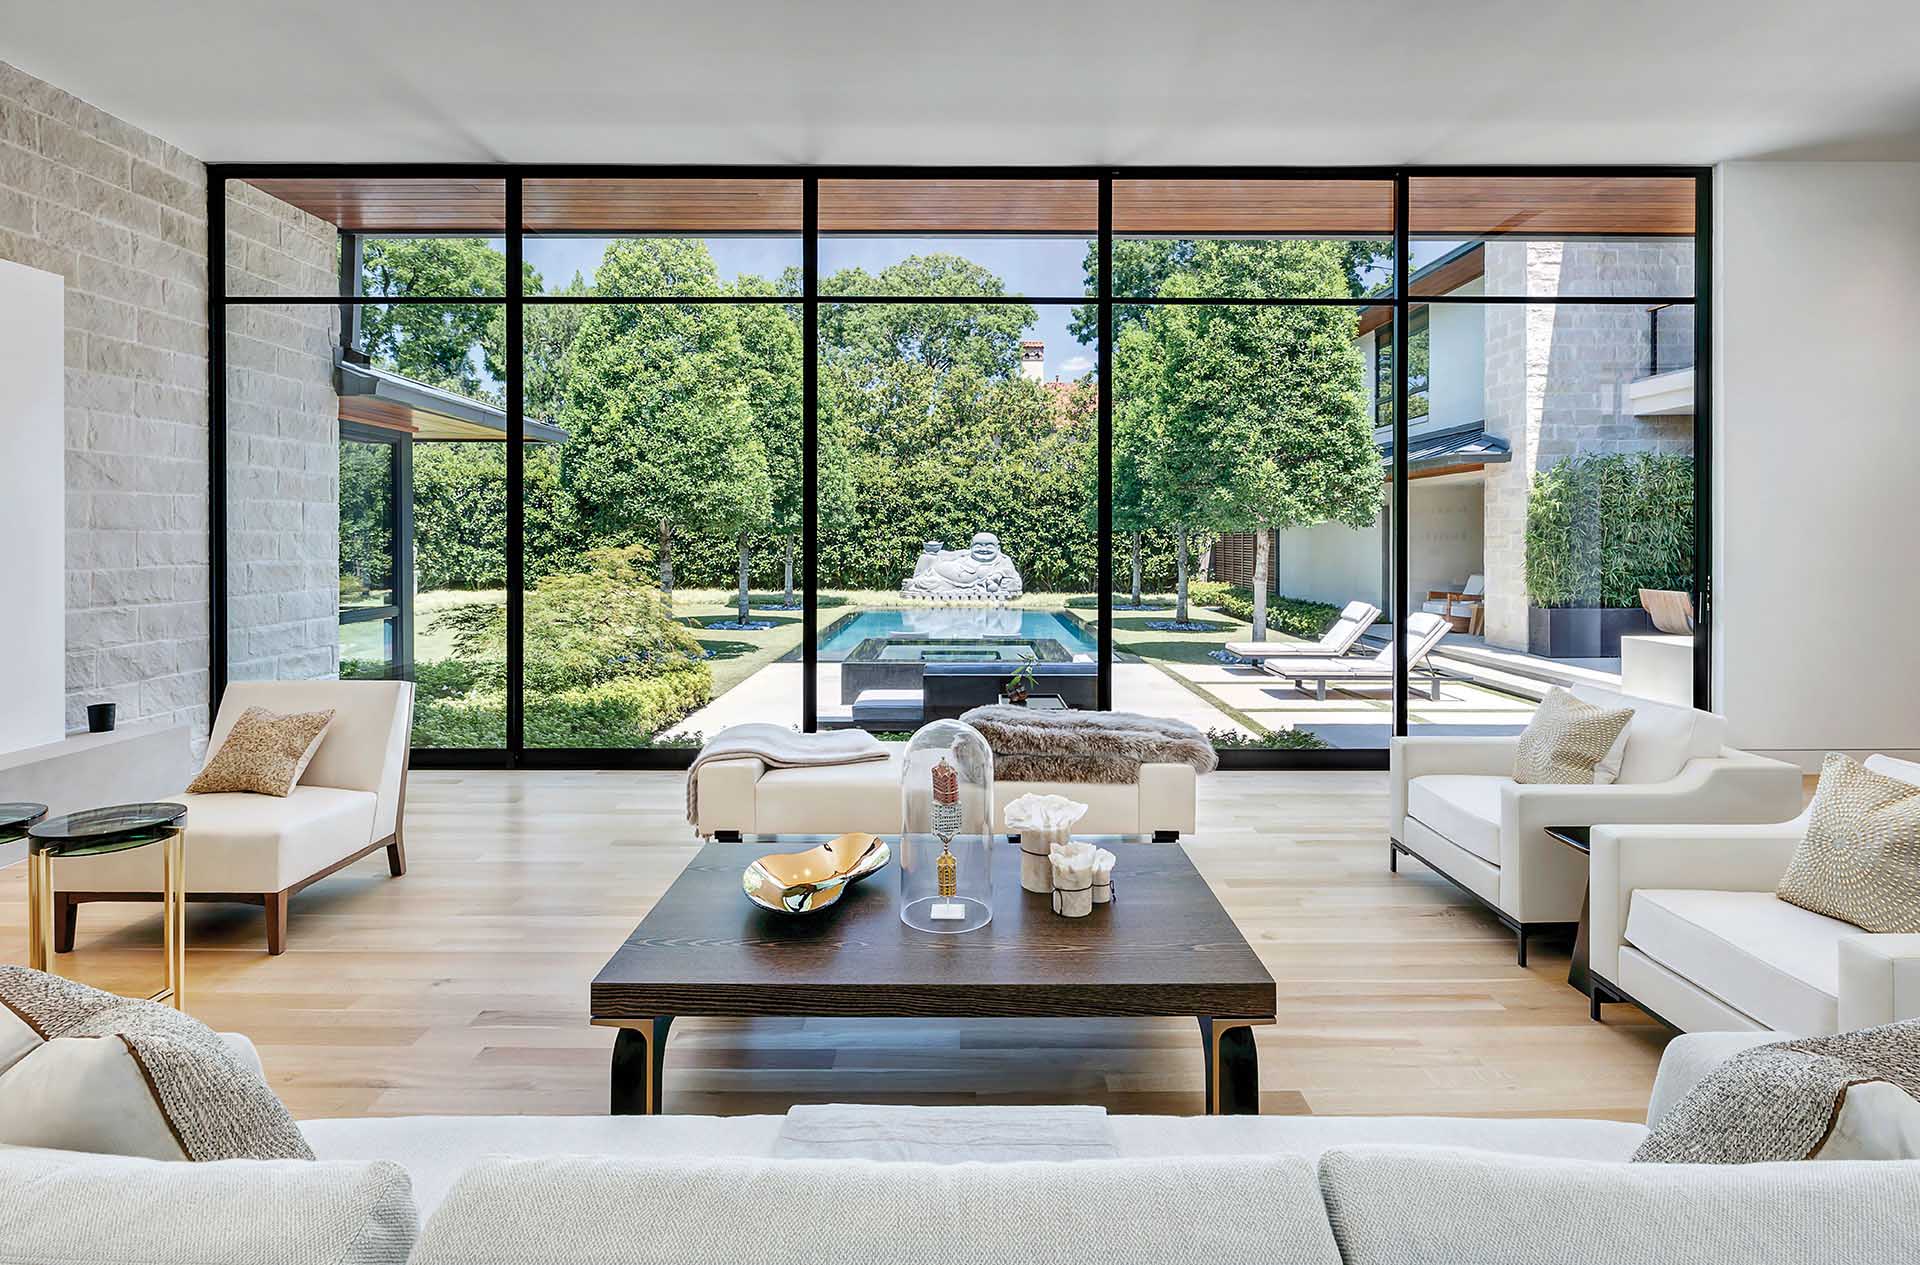 An AIA Home Tour comfortable modern contemporary living room featuring a modern fireplace designed by Bernbaum/Magadini Architects.